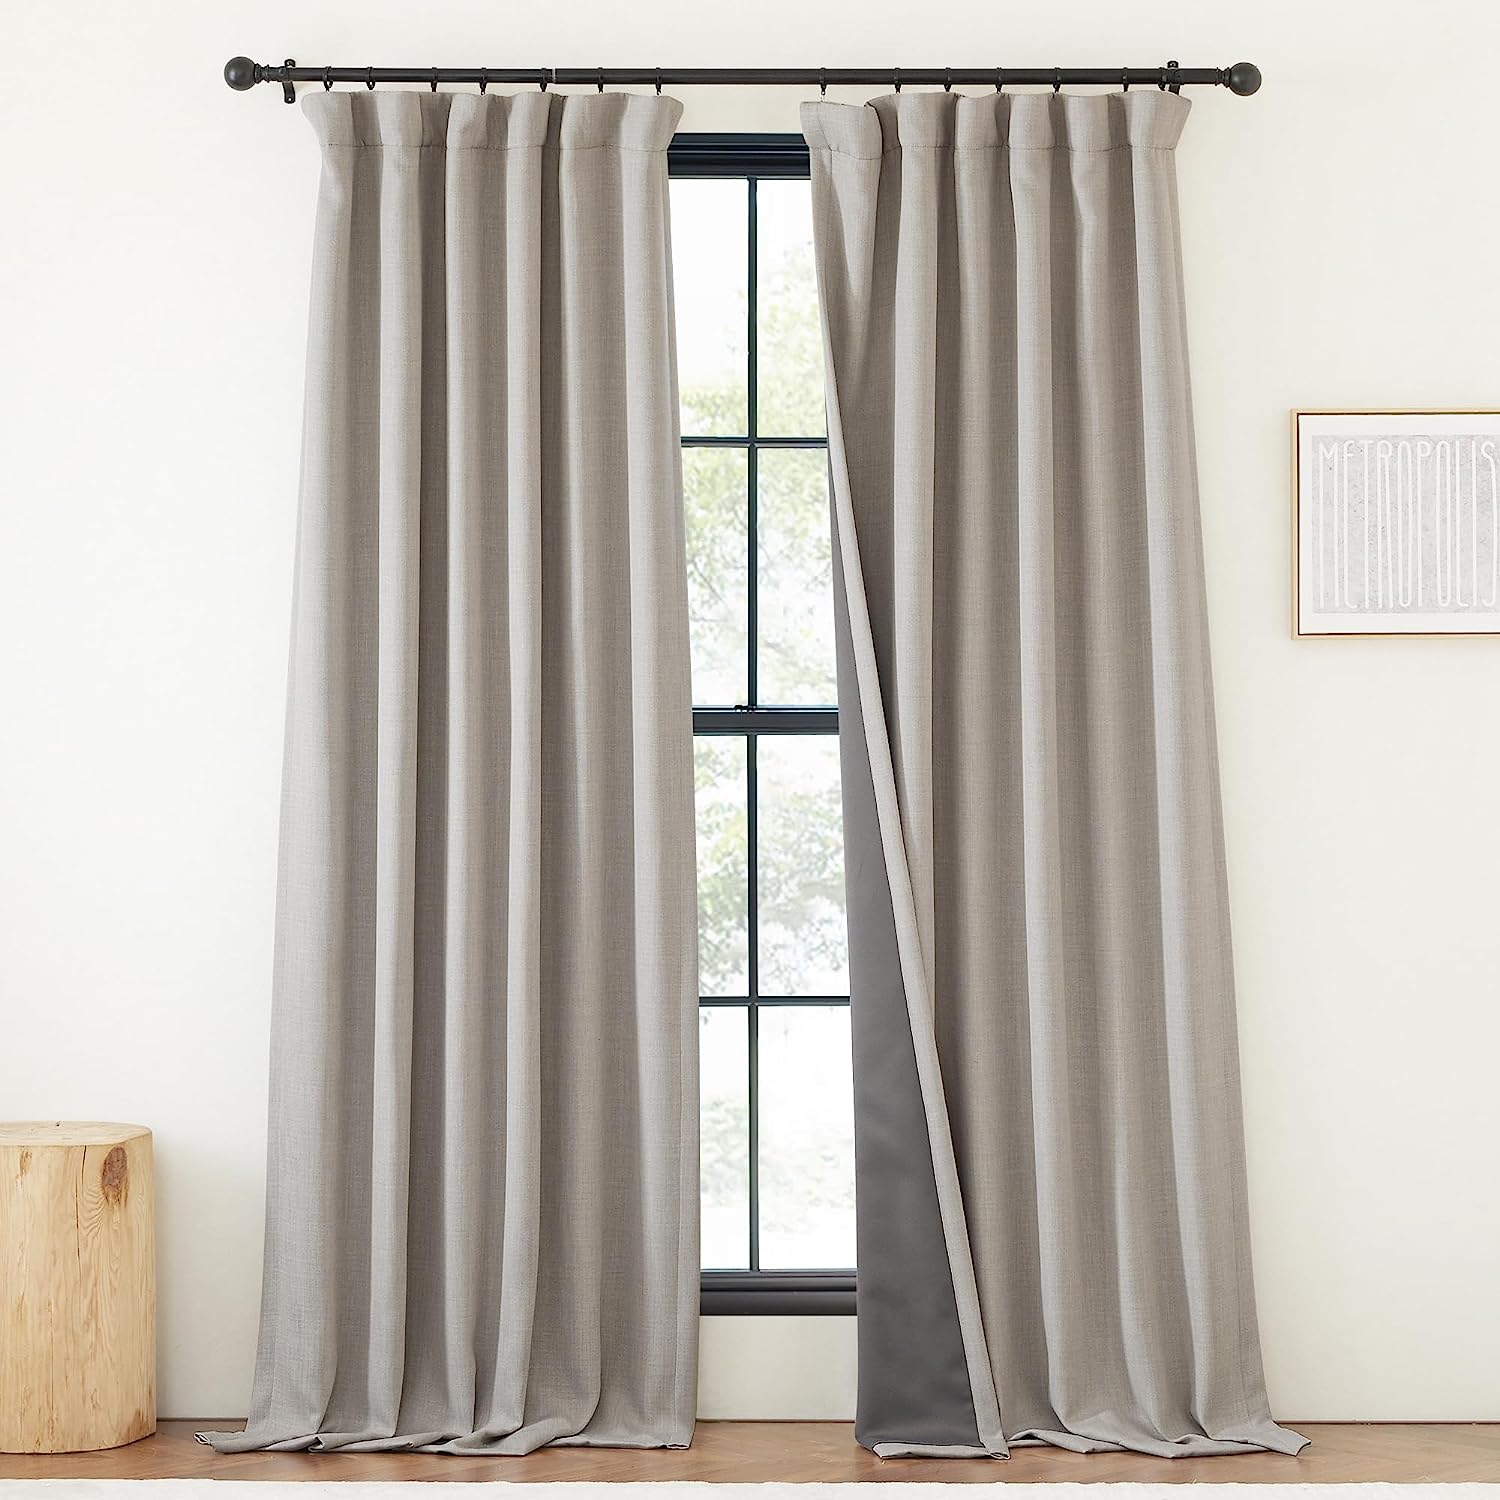 NICETOWN Faux Linen 100% Blackout Curtains 96 inches [...]